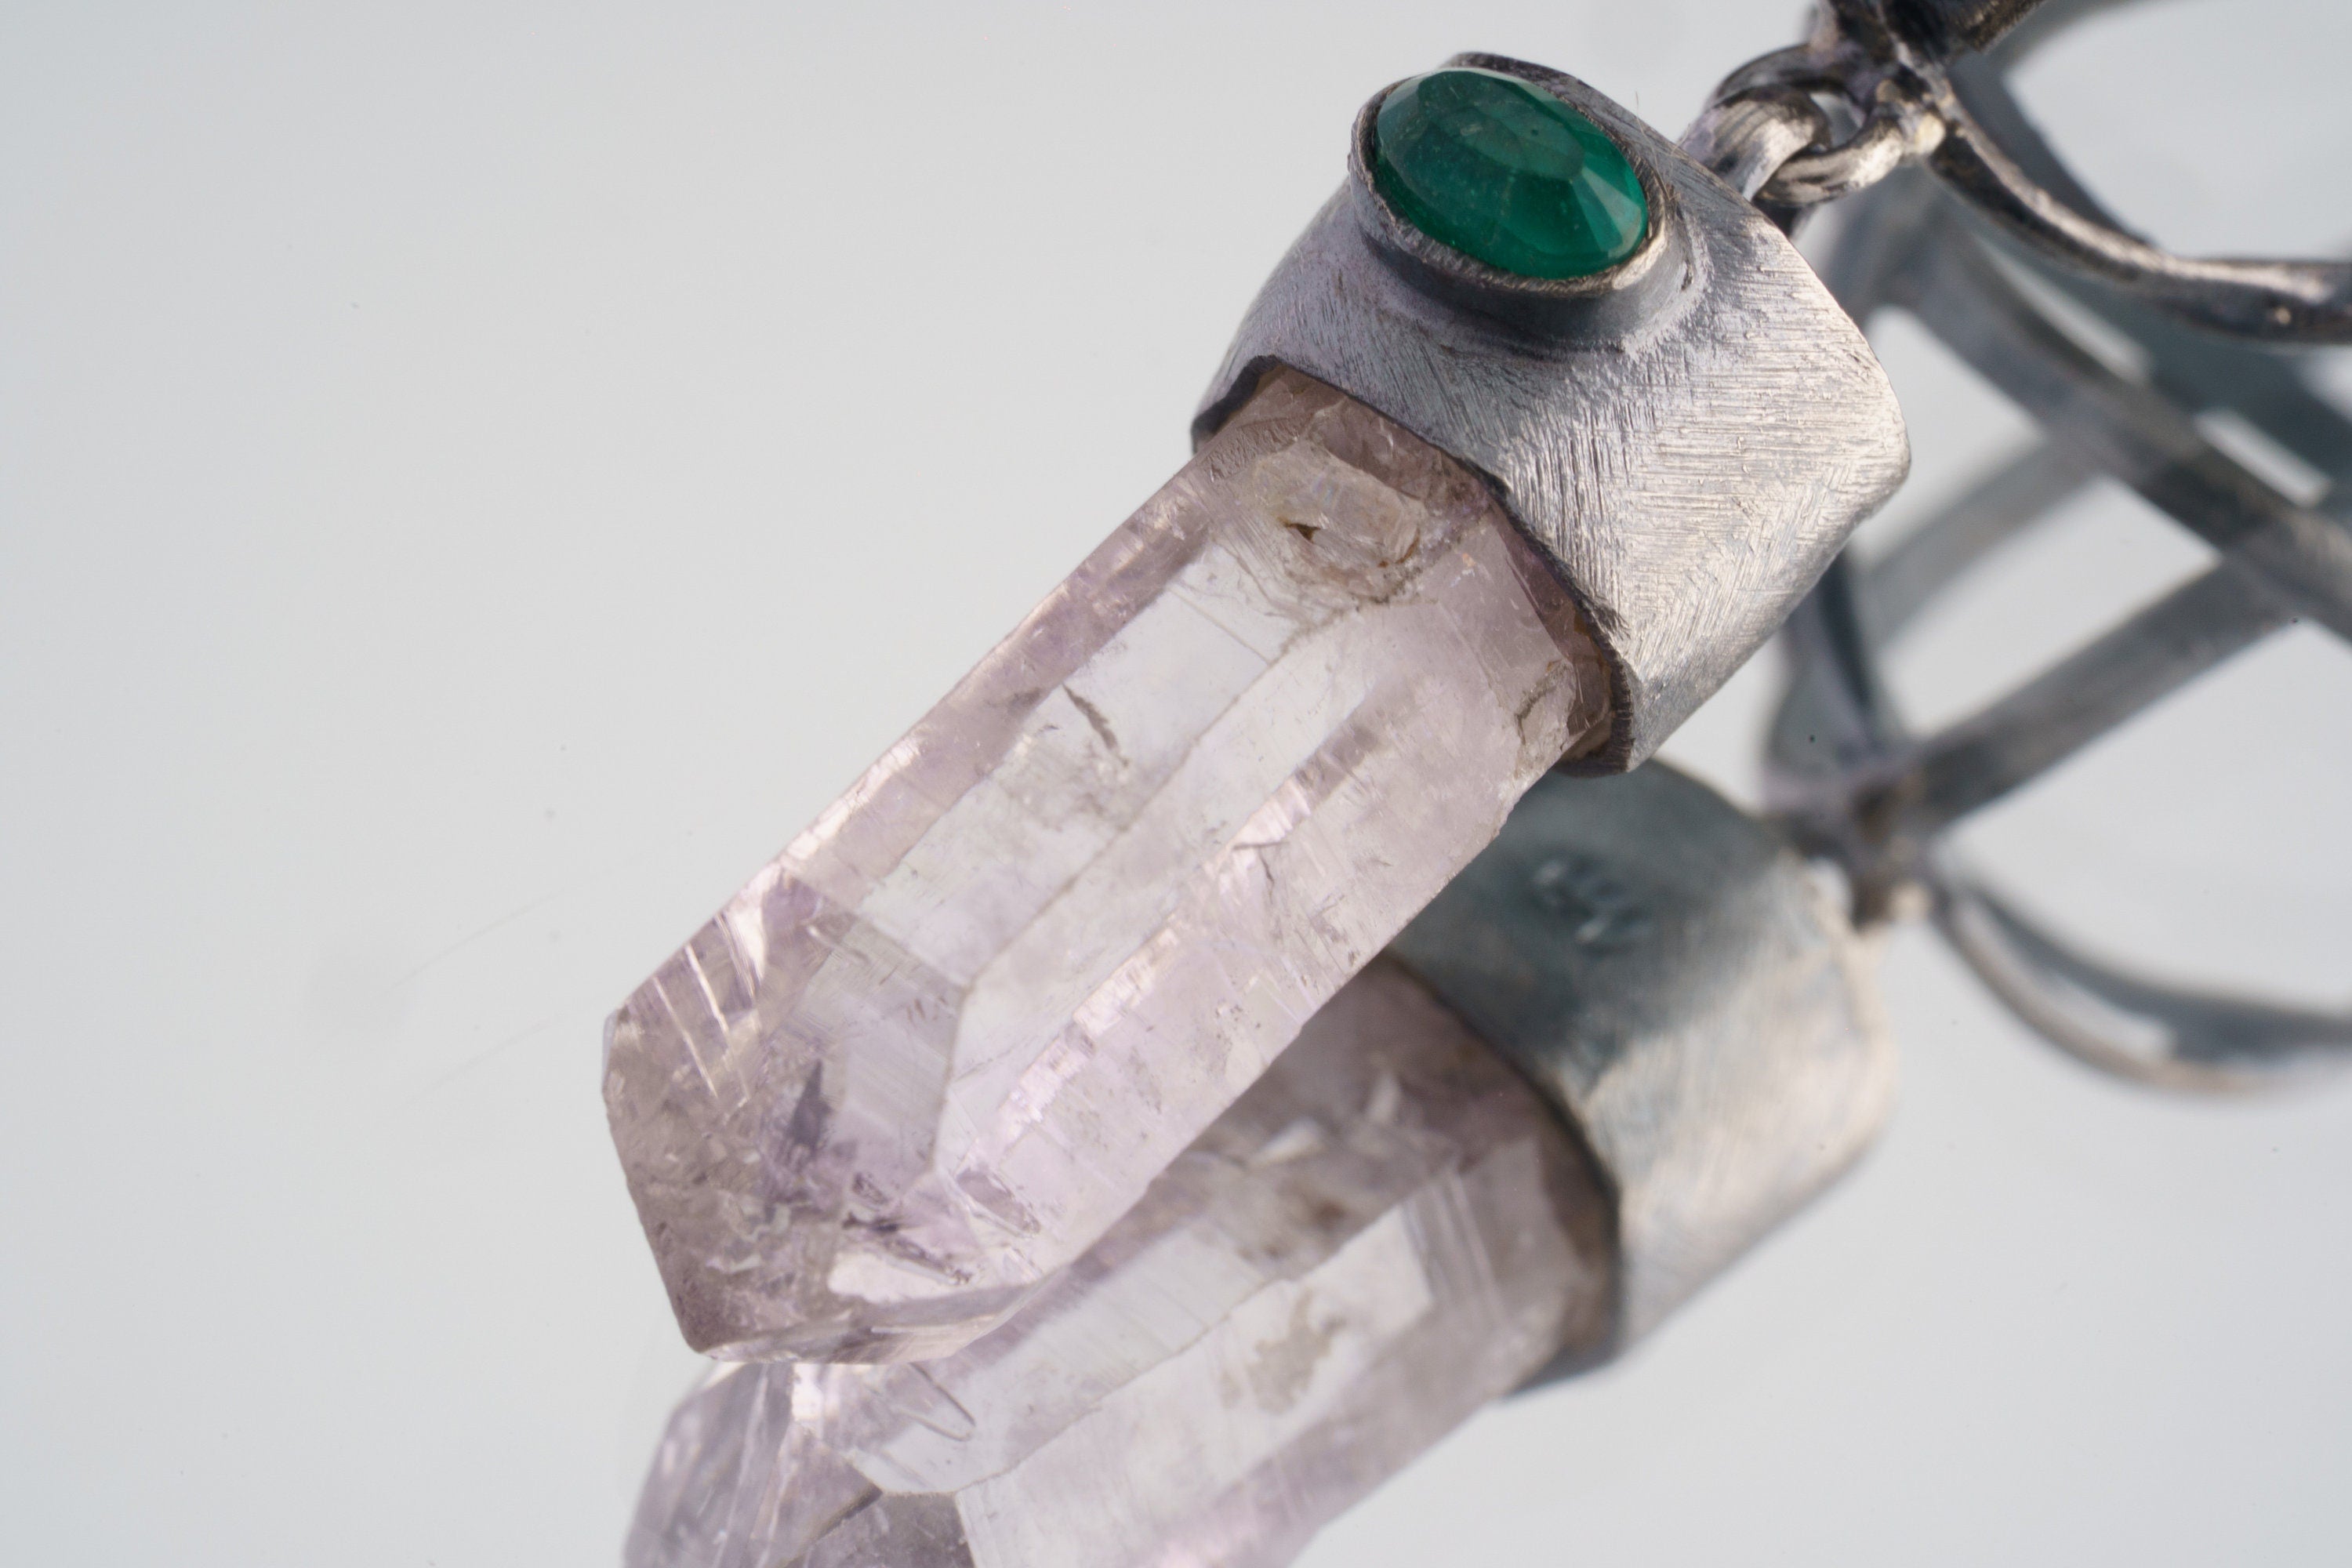 Ethereal Harmony: Vera Cruz Amethyst Point & Eye Shaped Faceted Emerald - Oxidised and Brush Textured - Sterling Silver Pendant